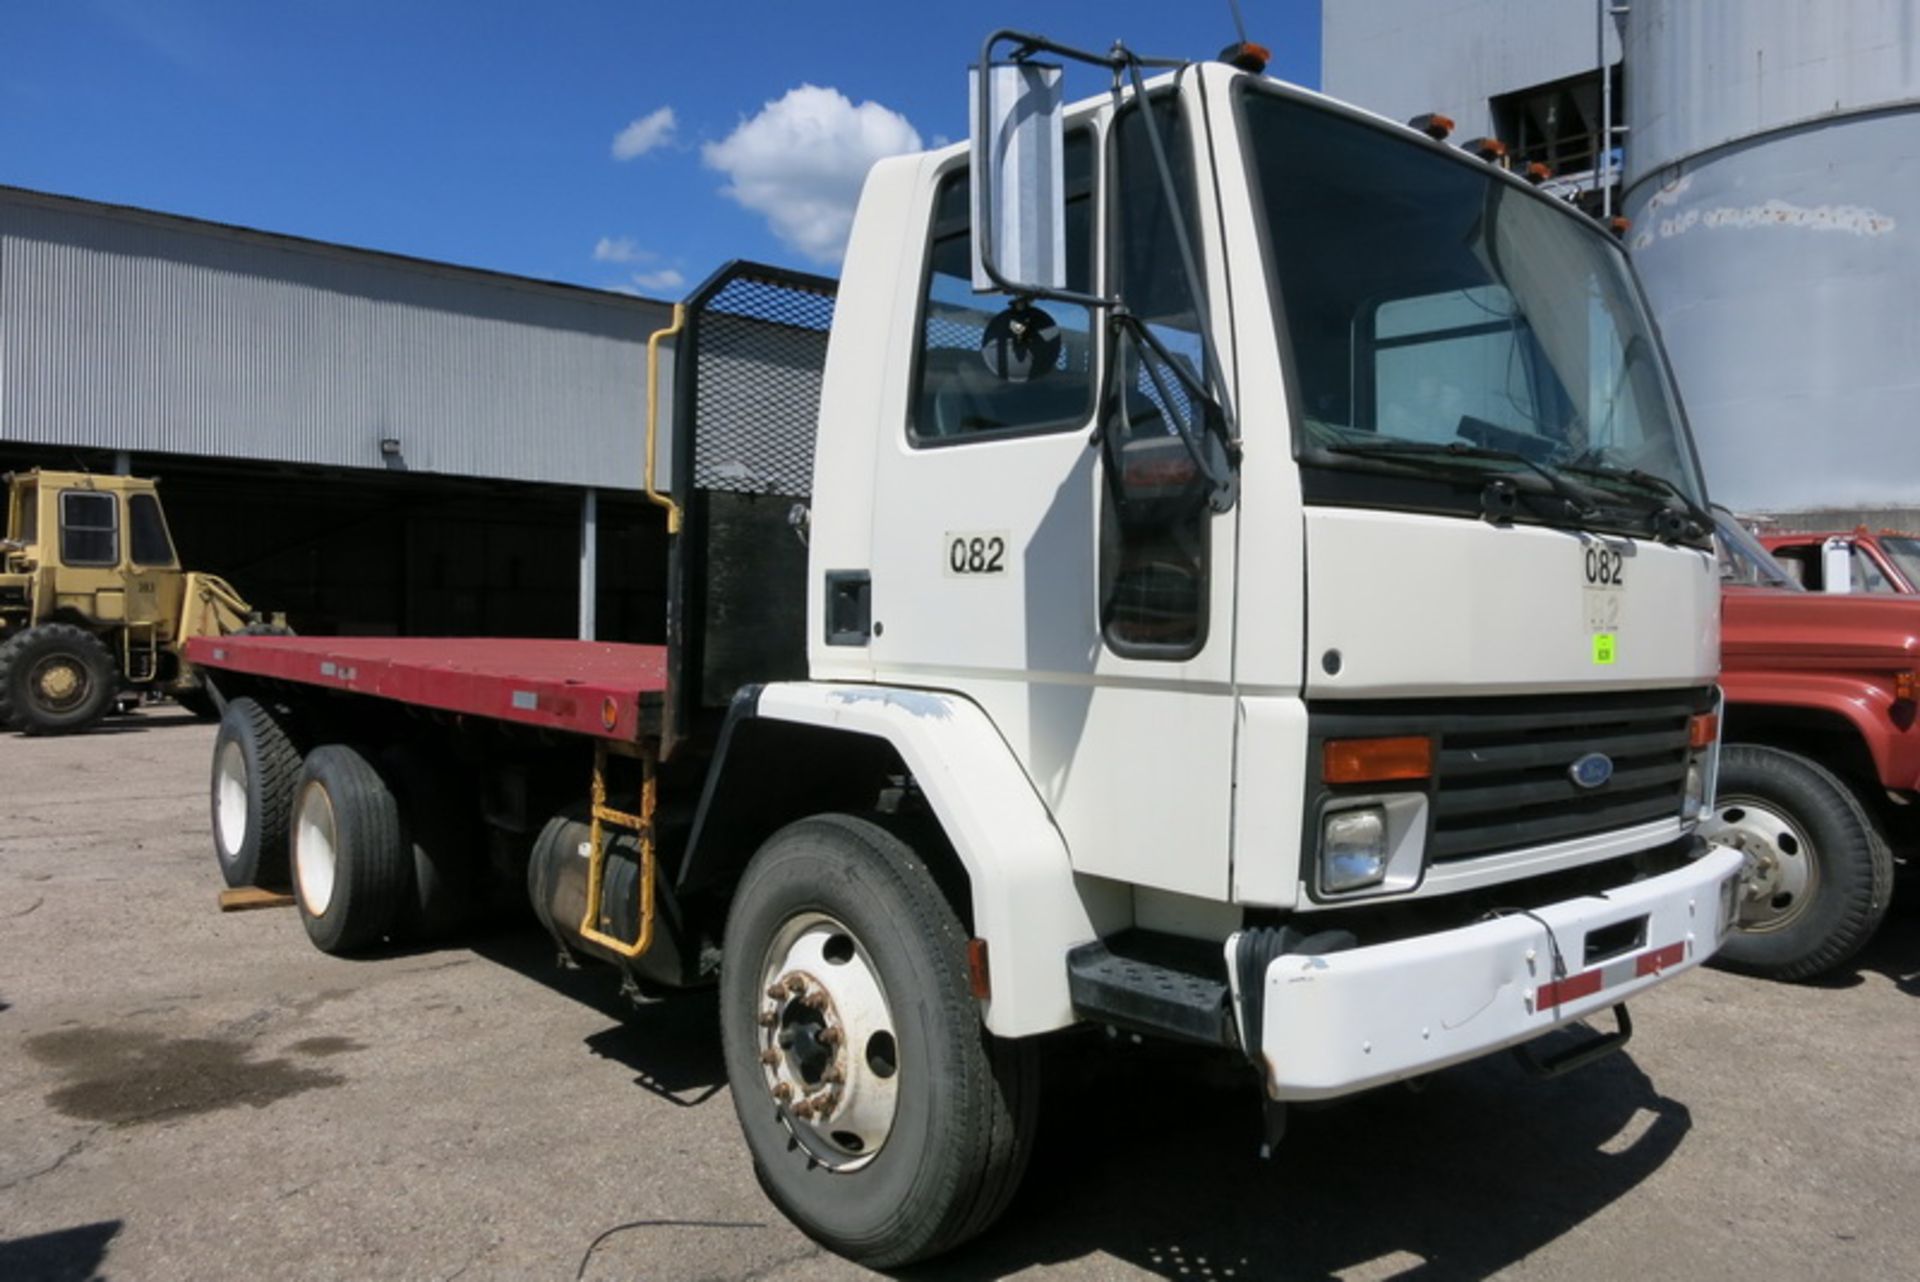 1993 Ford CF 7000 flatbed truck, 24", tandem axle, 29,000 GVWR, automatic transmission, 158,523